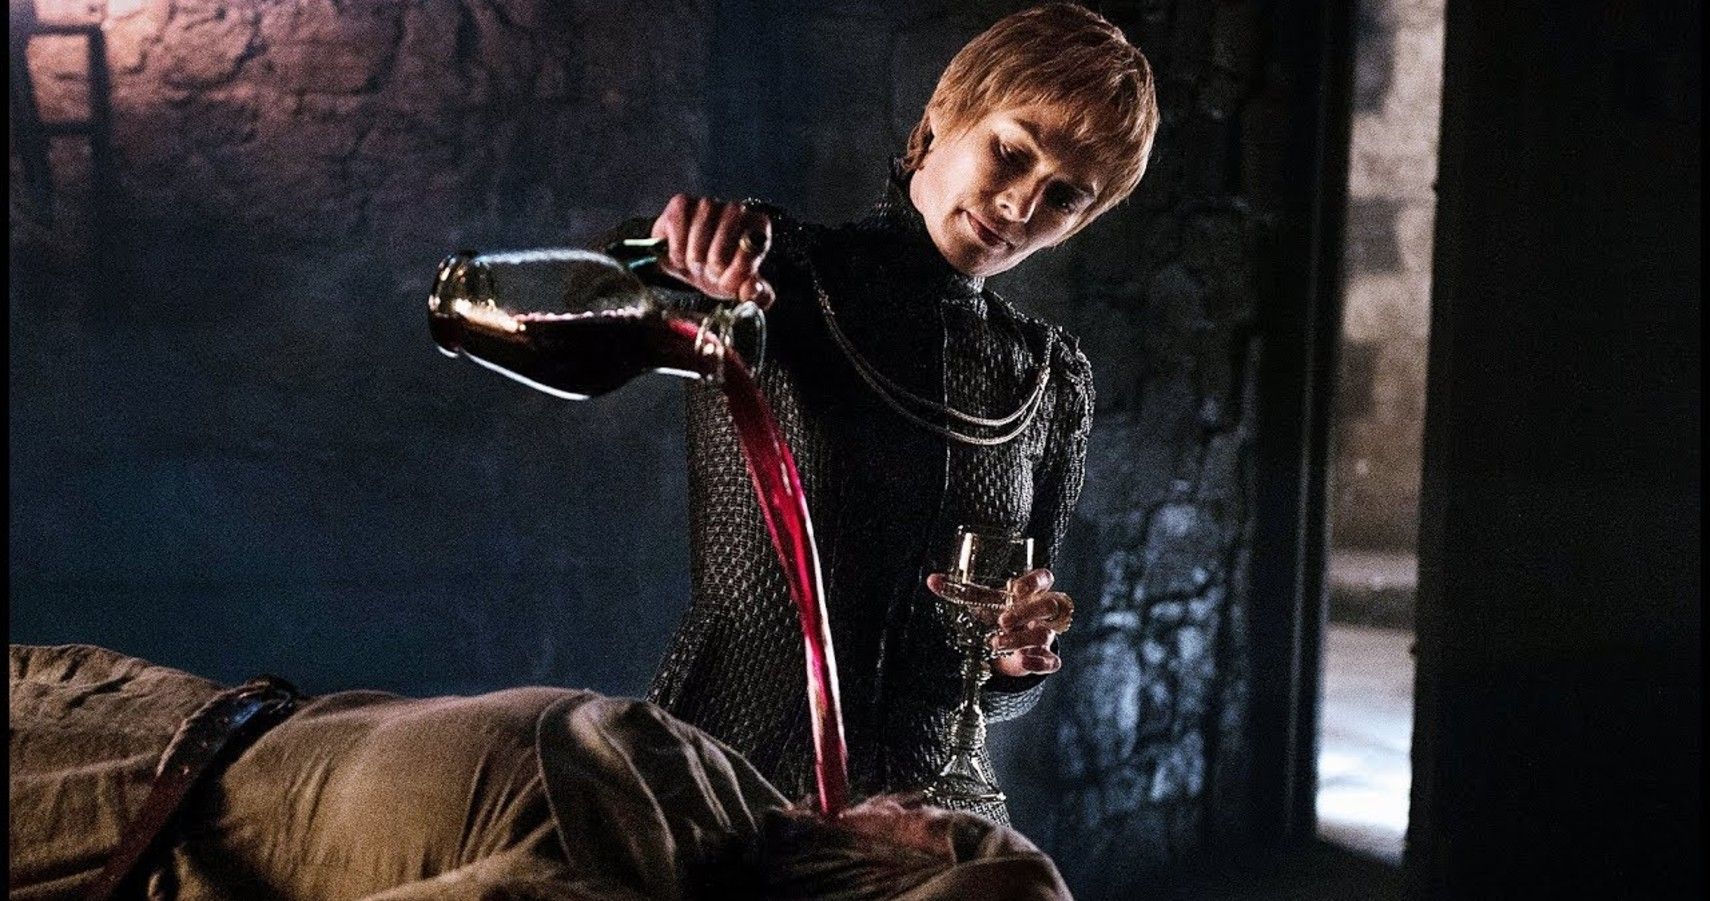 cersei pouring wine on septa game of thrones